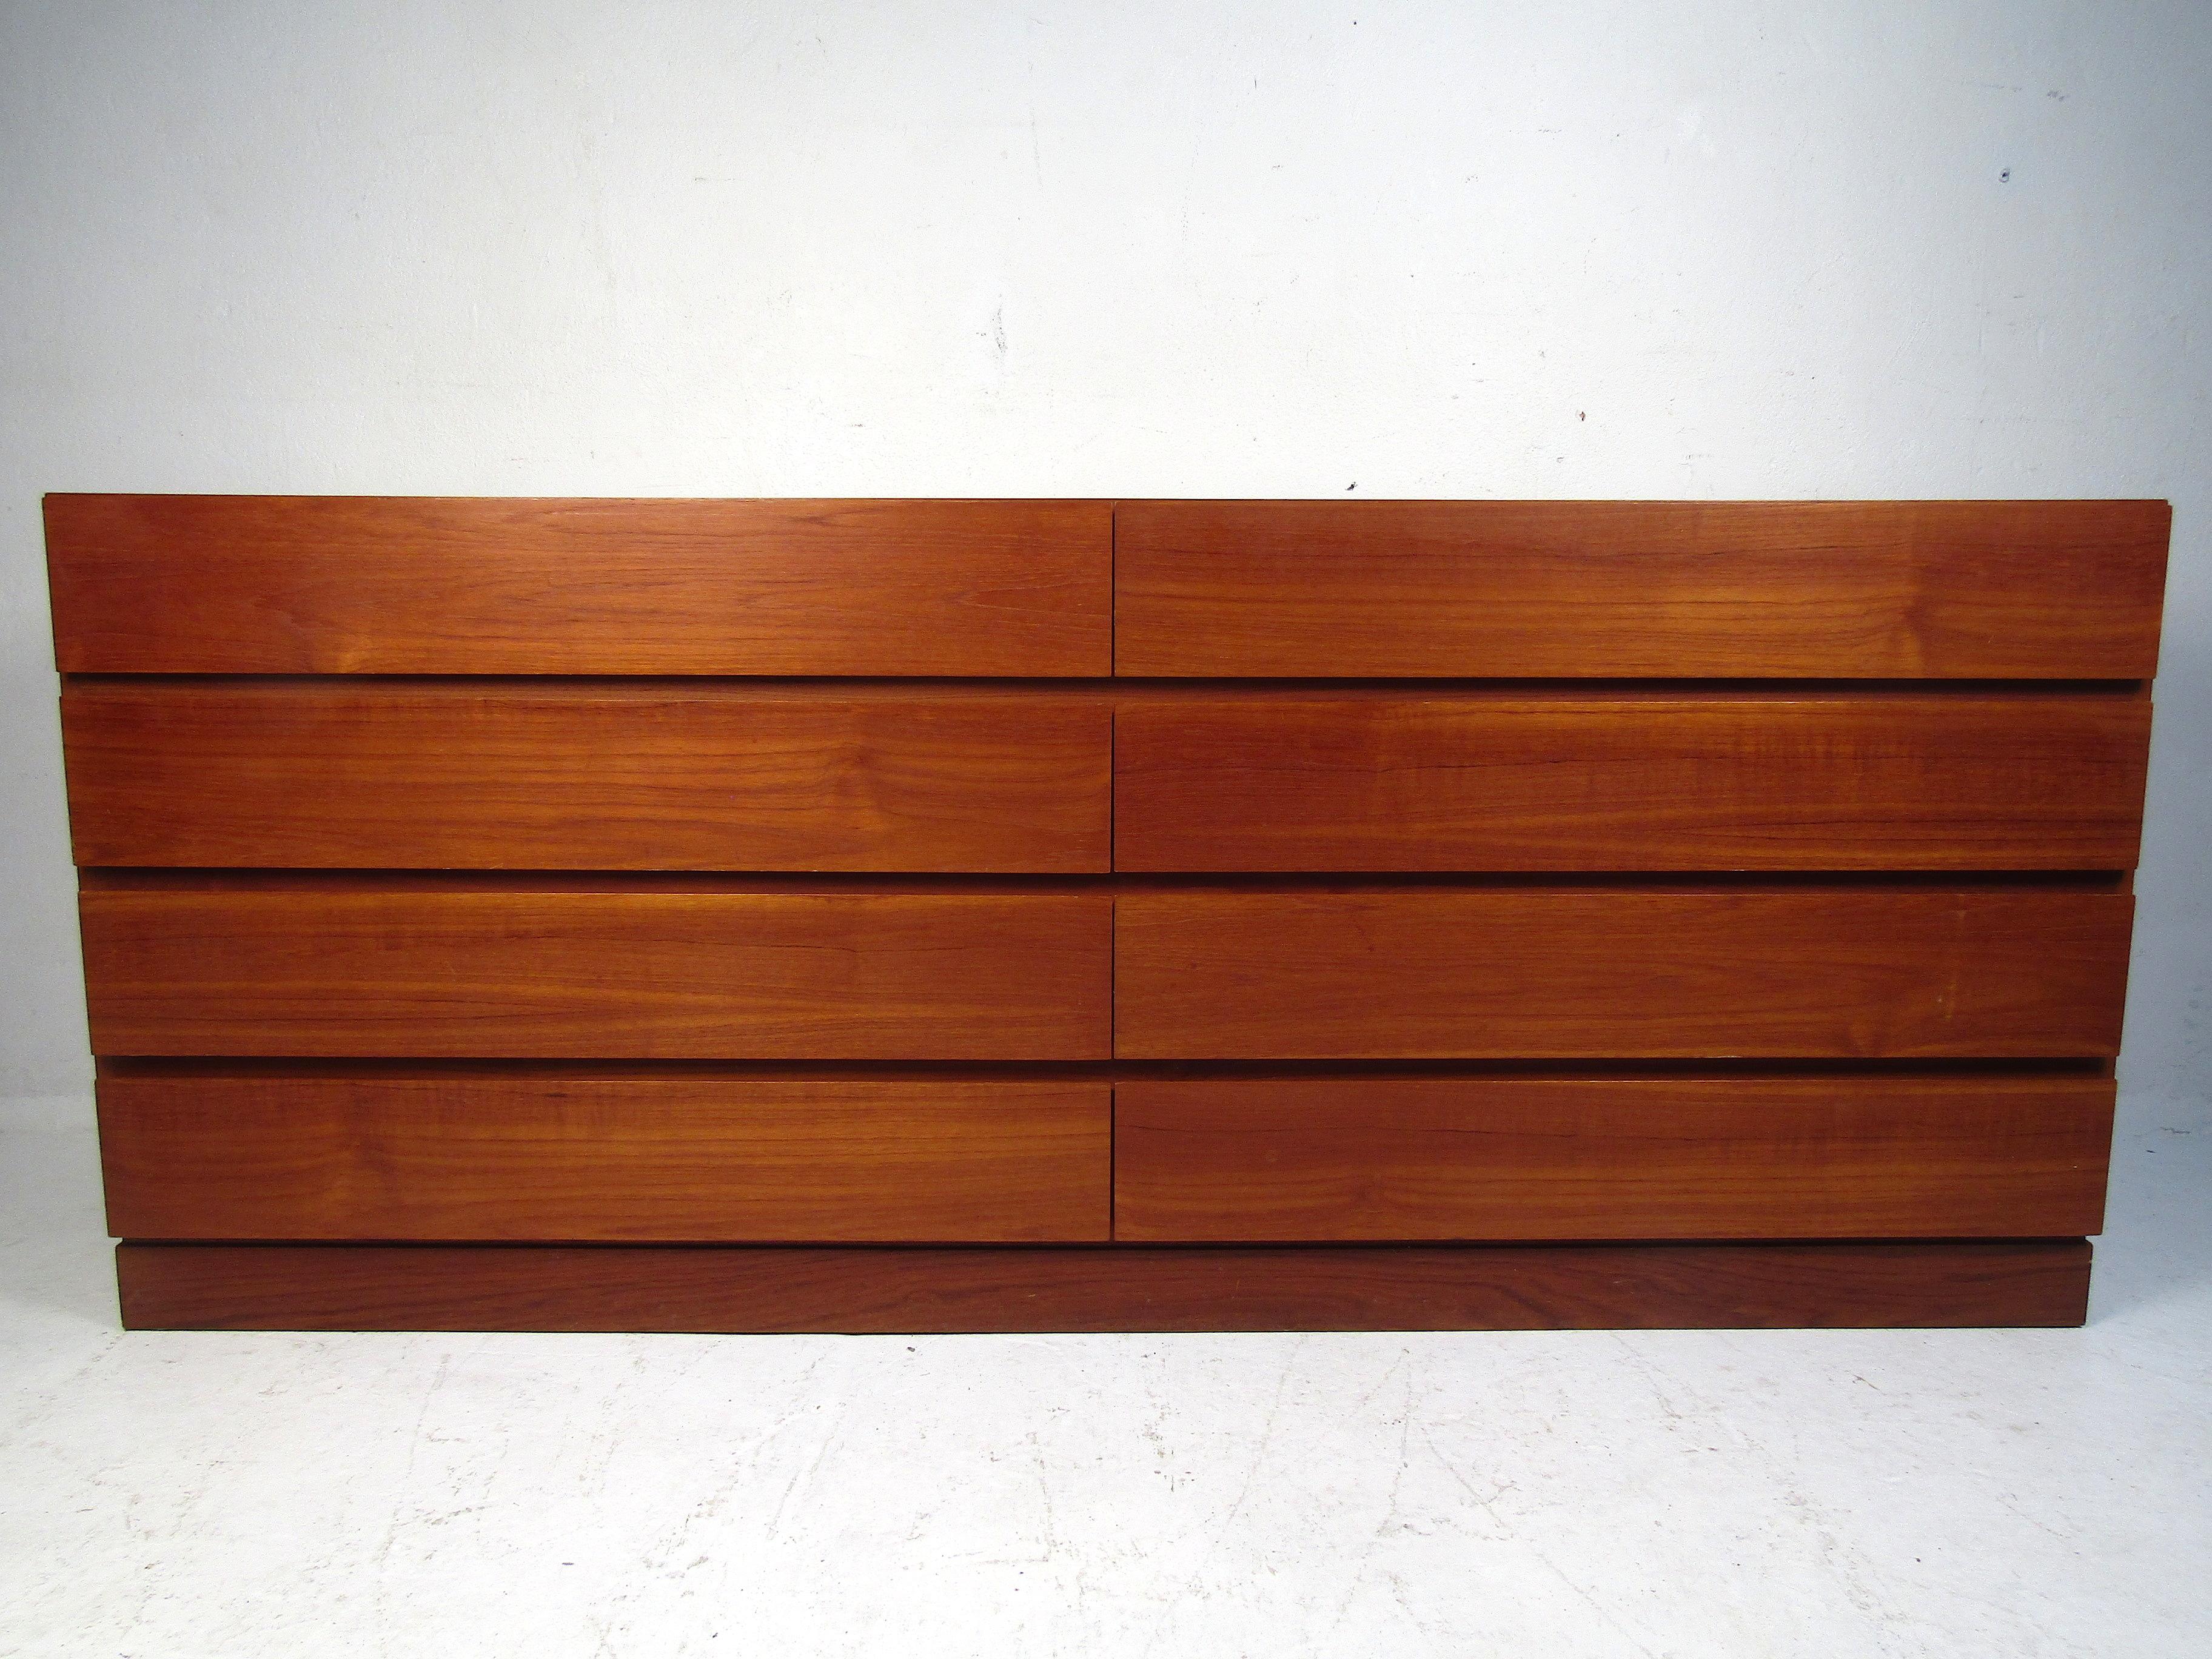 Stylish Danish modern eight-drawer dresser. The piece's exterior is covered in a good-looking teak veneer. Sure to make a nice addition to any modern interior. Please confirm item location with dealer (NJ or NY).